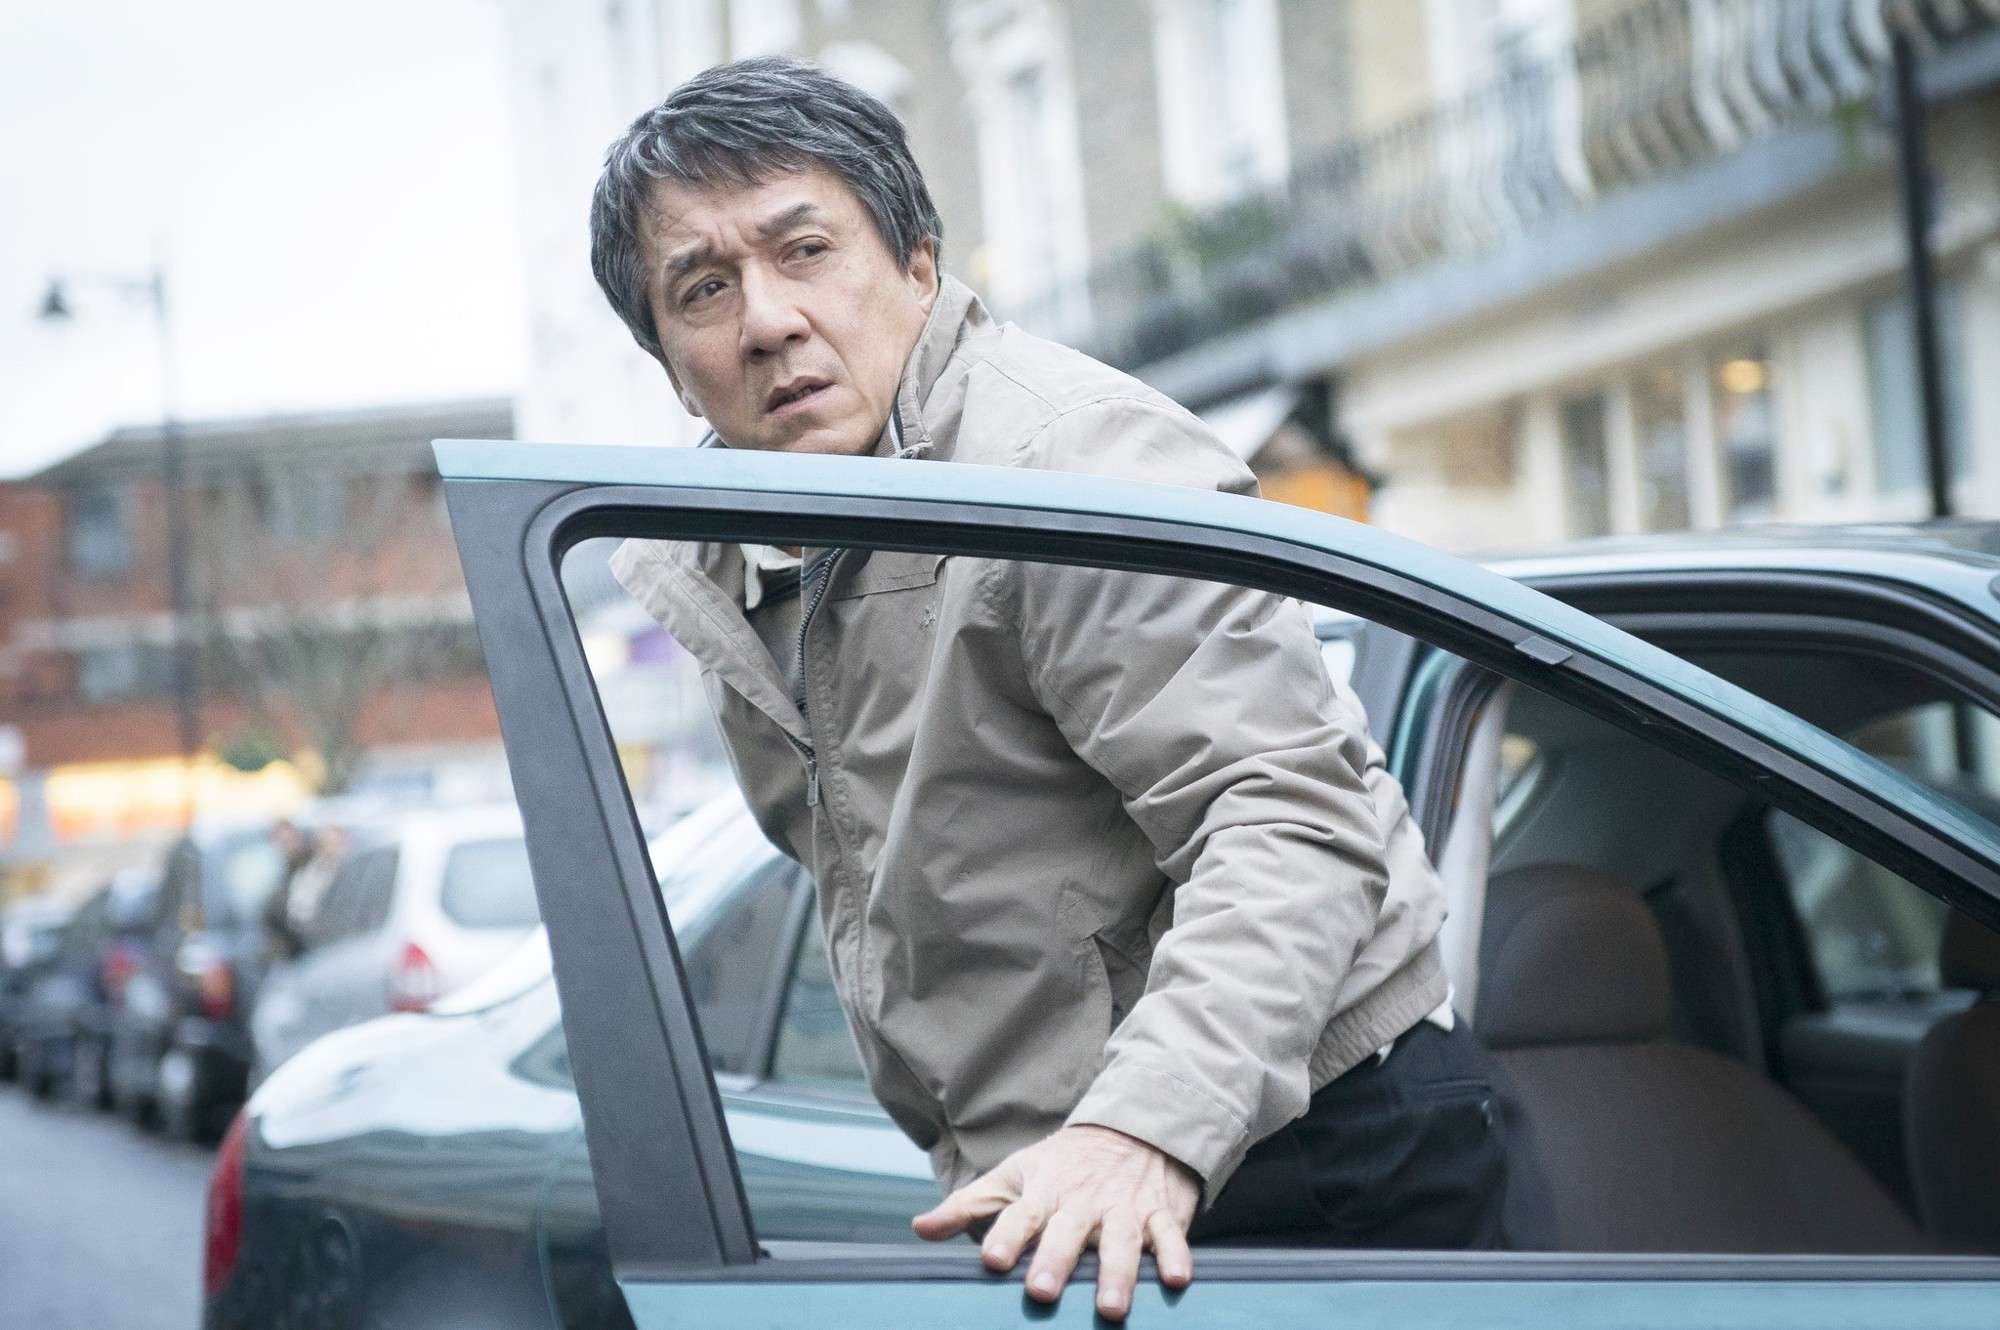 Jackie Chan stars as Quan in STX Entertainment's The Foreigner (2017)